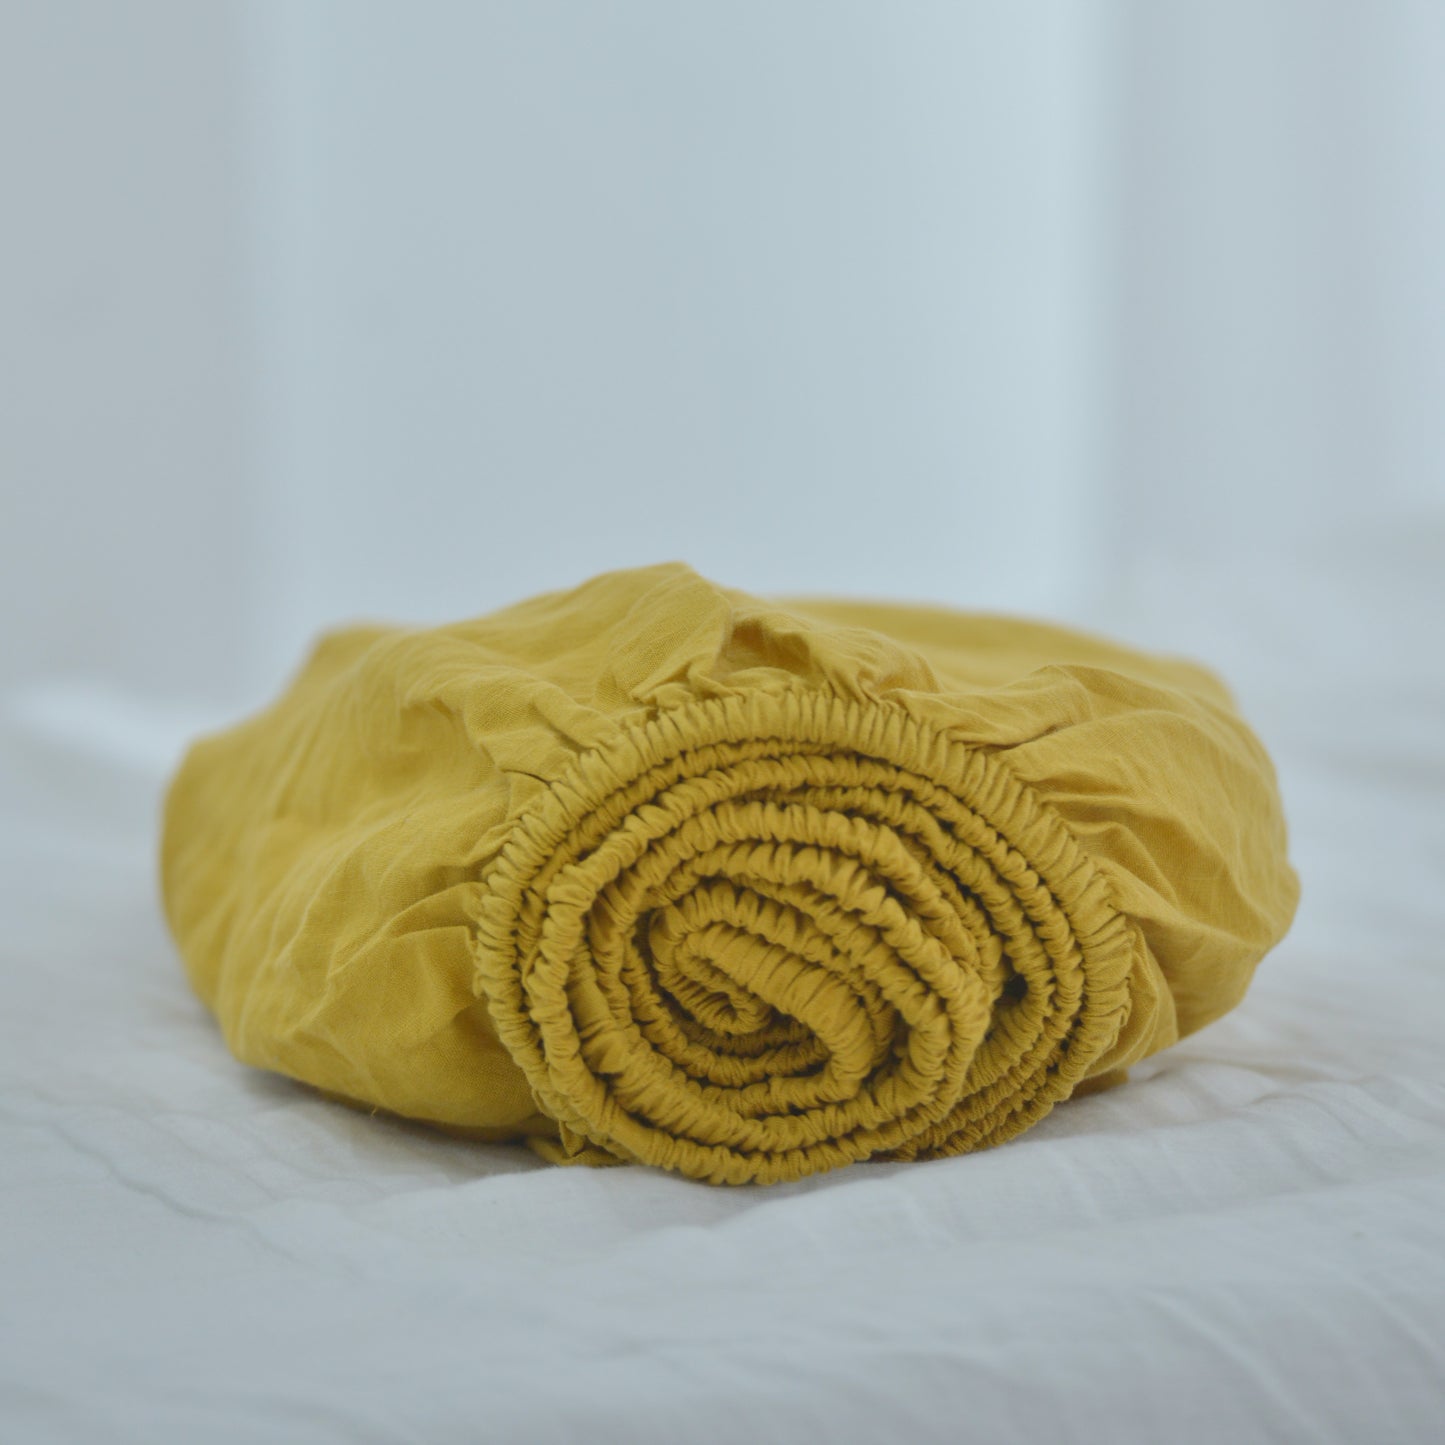 Yellow French Linen Fitted Sheet - Plain Dyeing